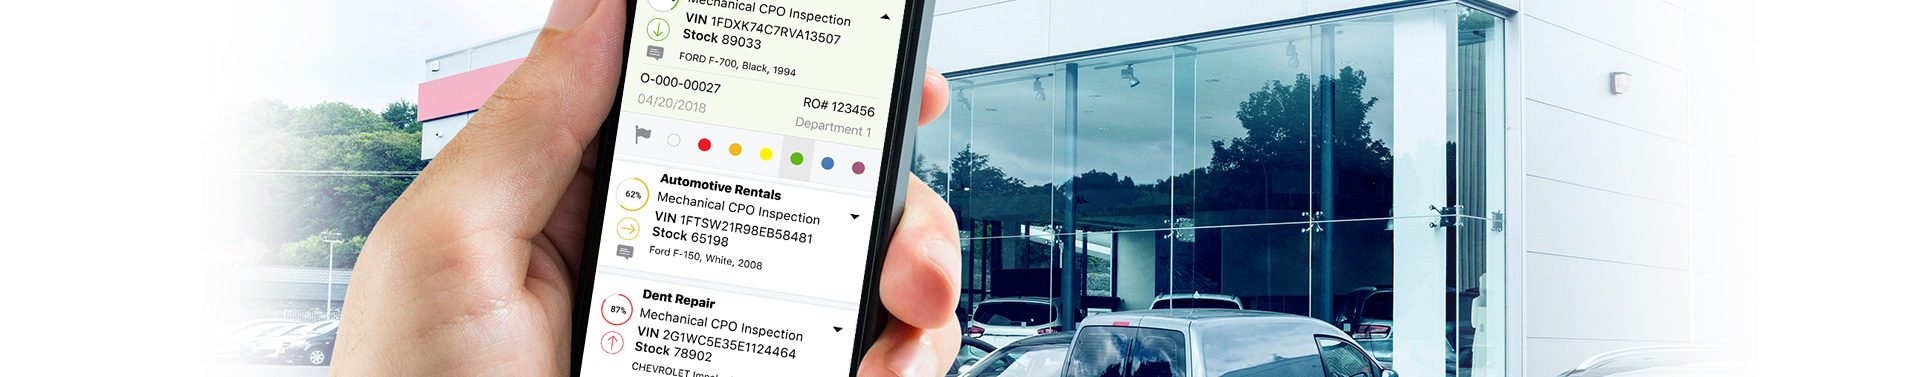 Dealership recon software on mobile device